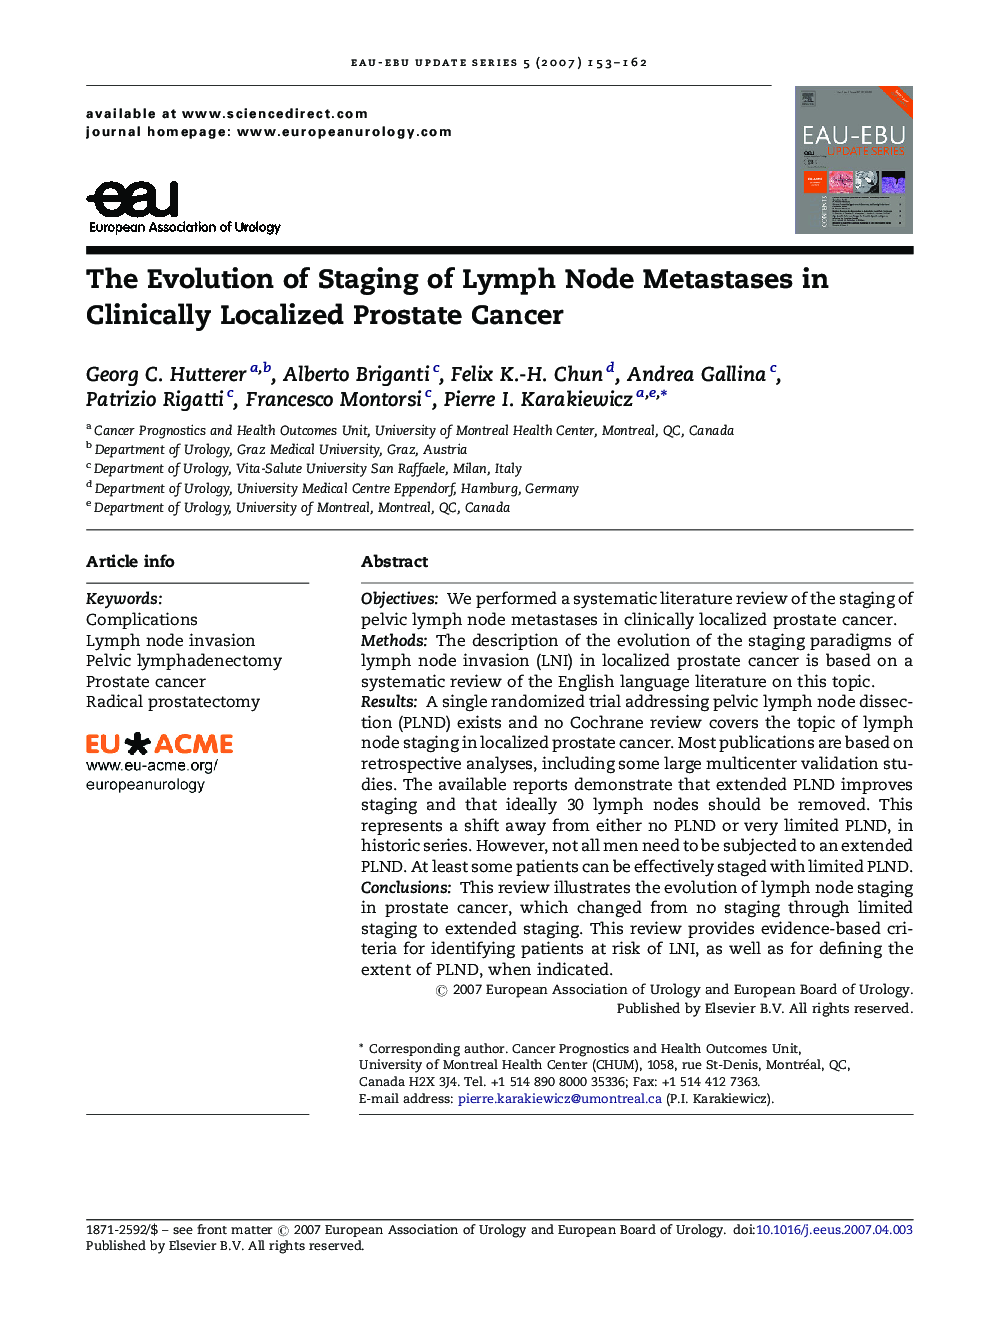 The Evolution of Staging of Lymph Node Metastases in Clinically Localized Prostate Cancer